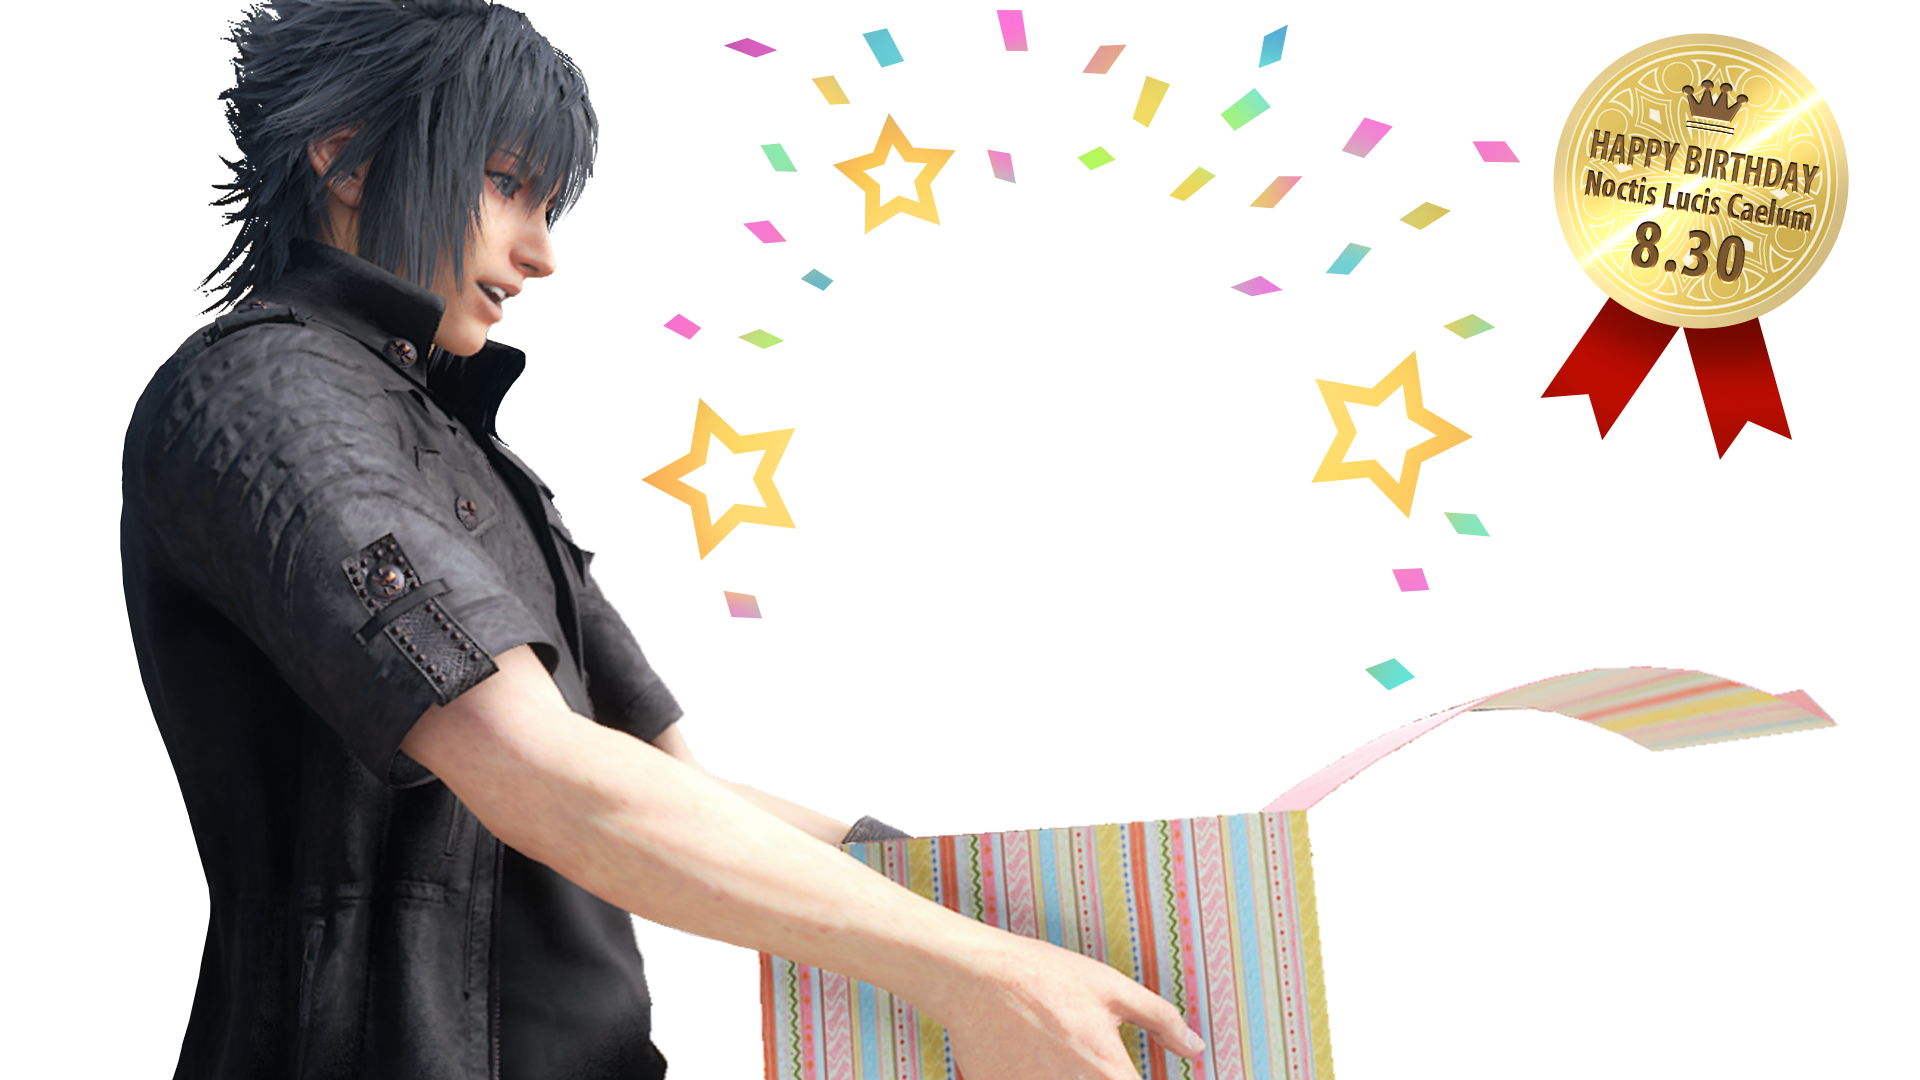 noctis_birthday_gift_star.png